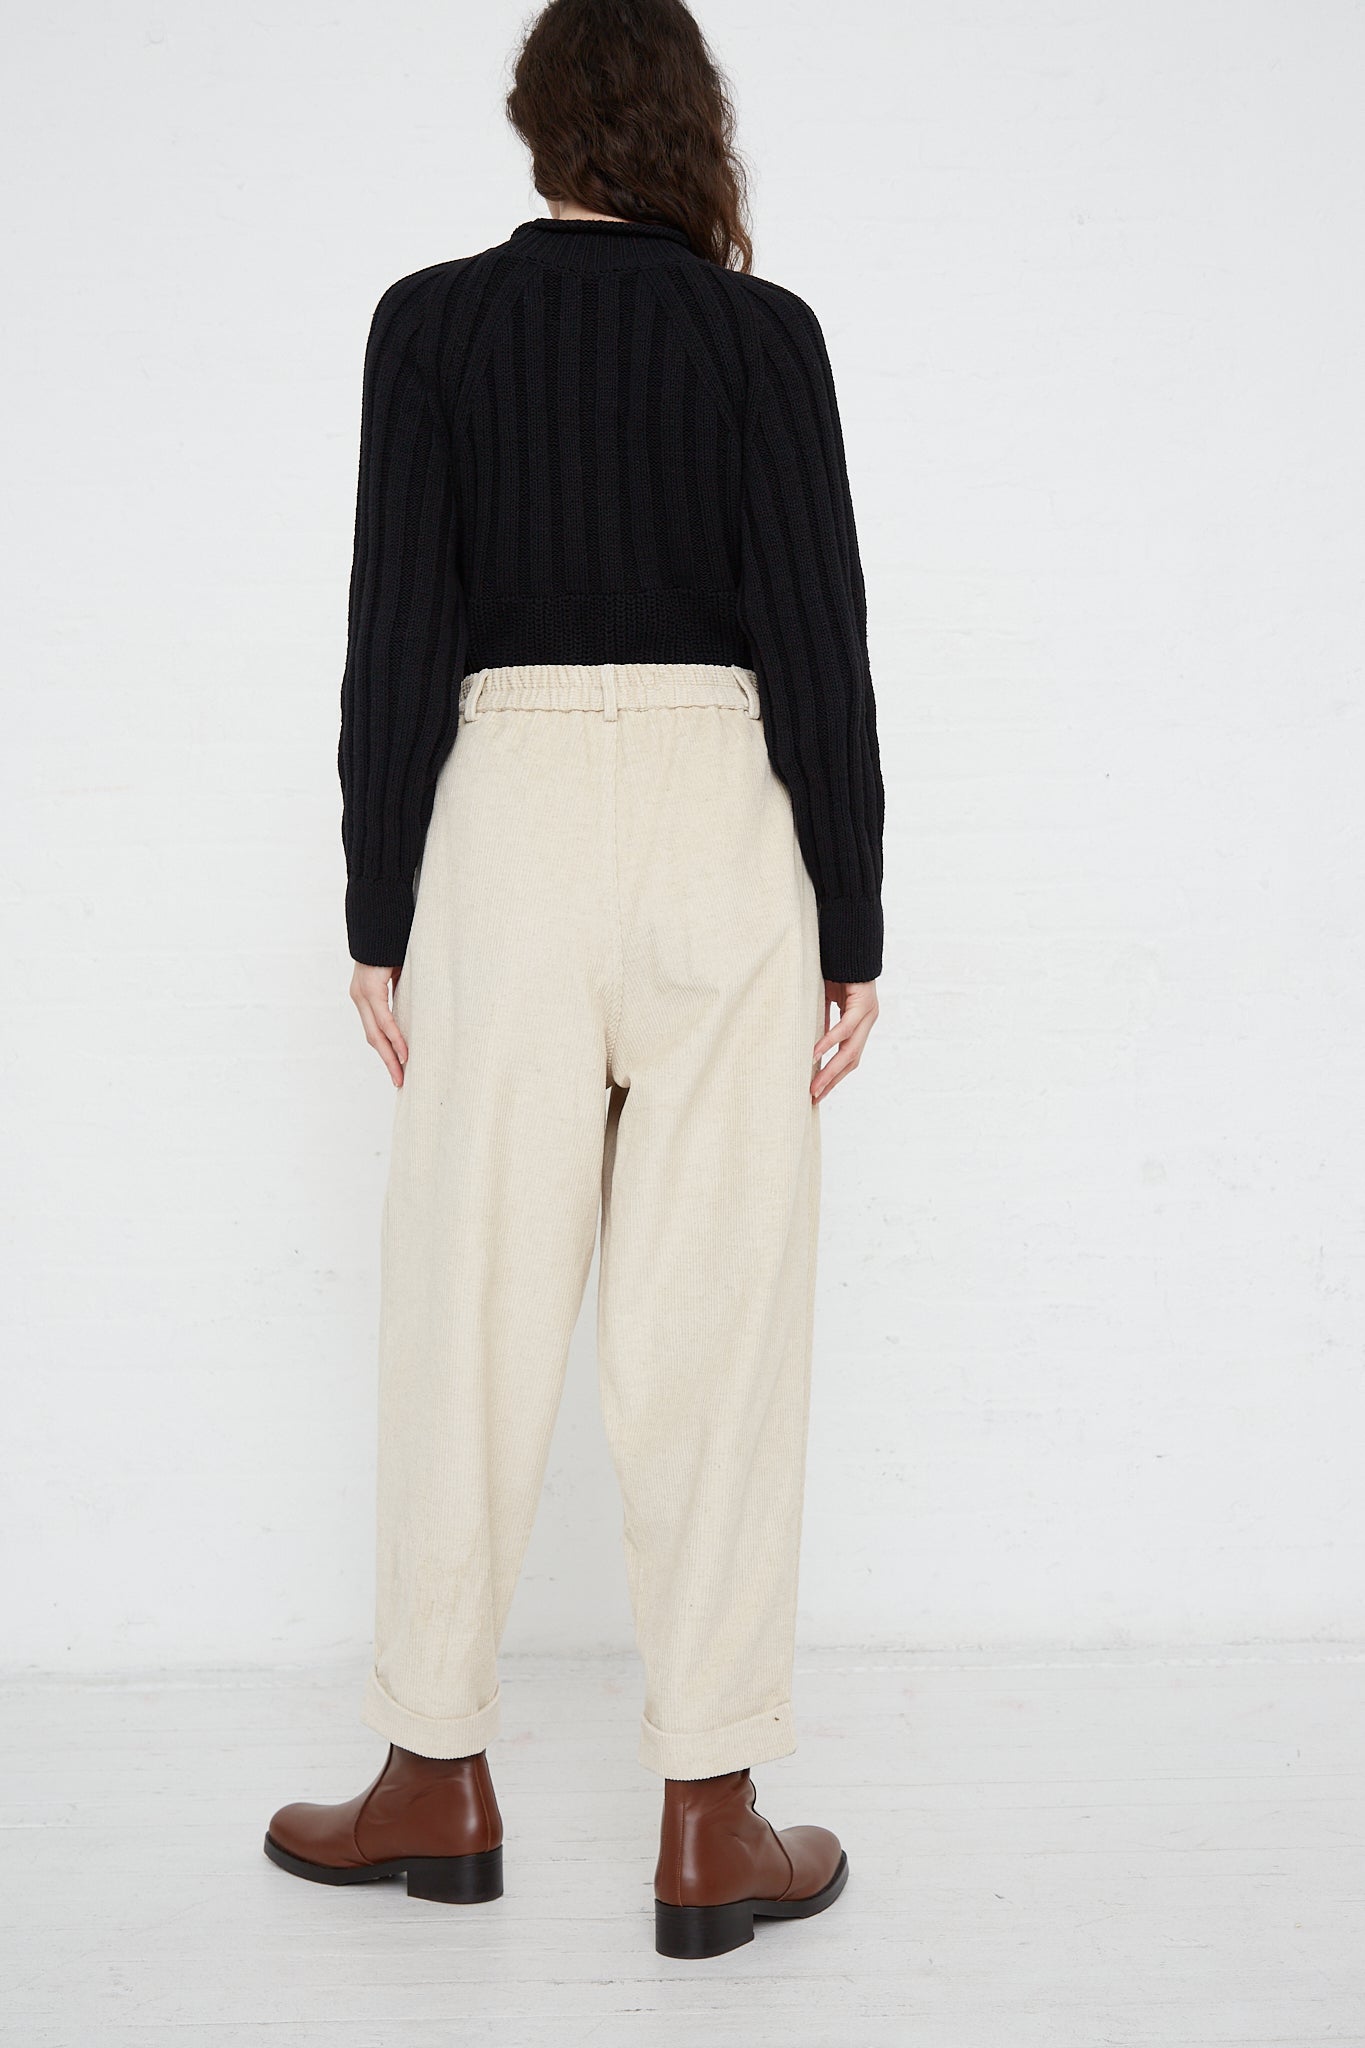 The back view of a woman wearing Corduroy Carrot Pants in Off White made by Cordera.